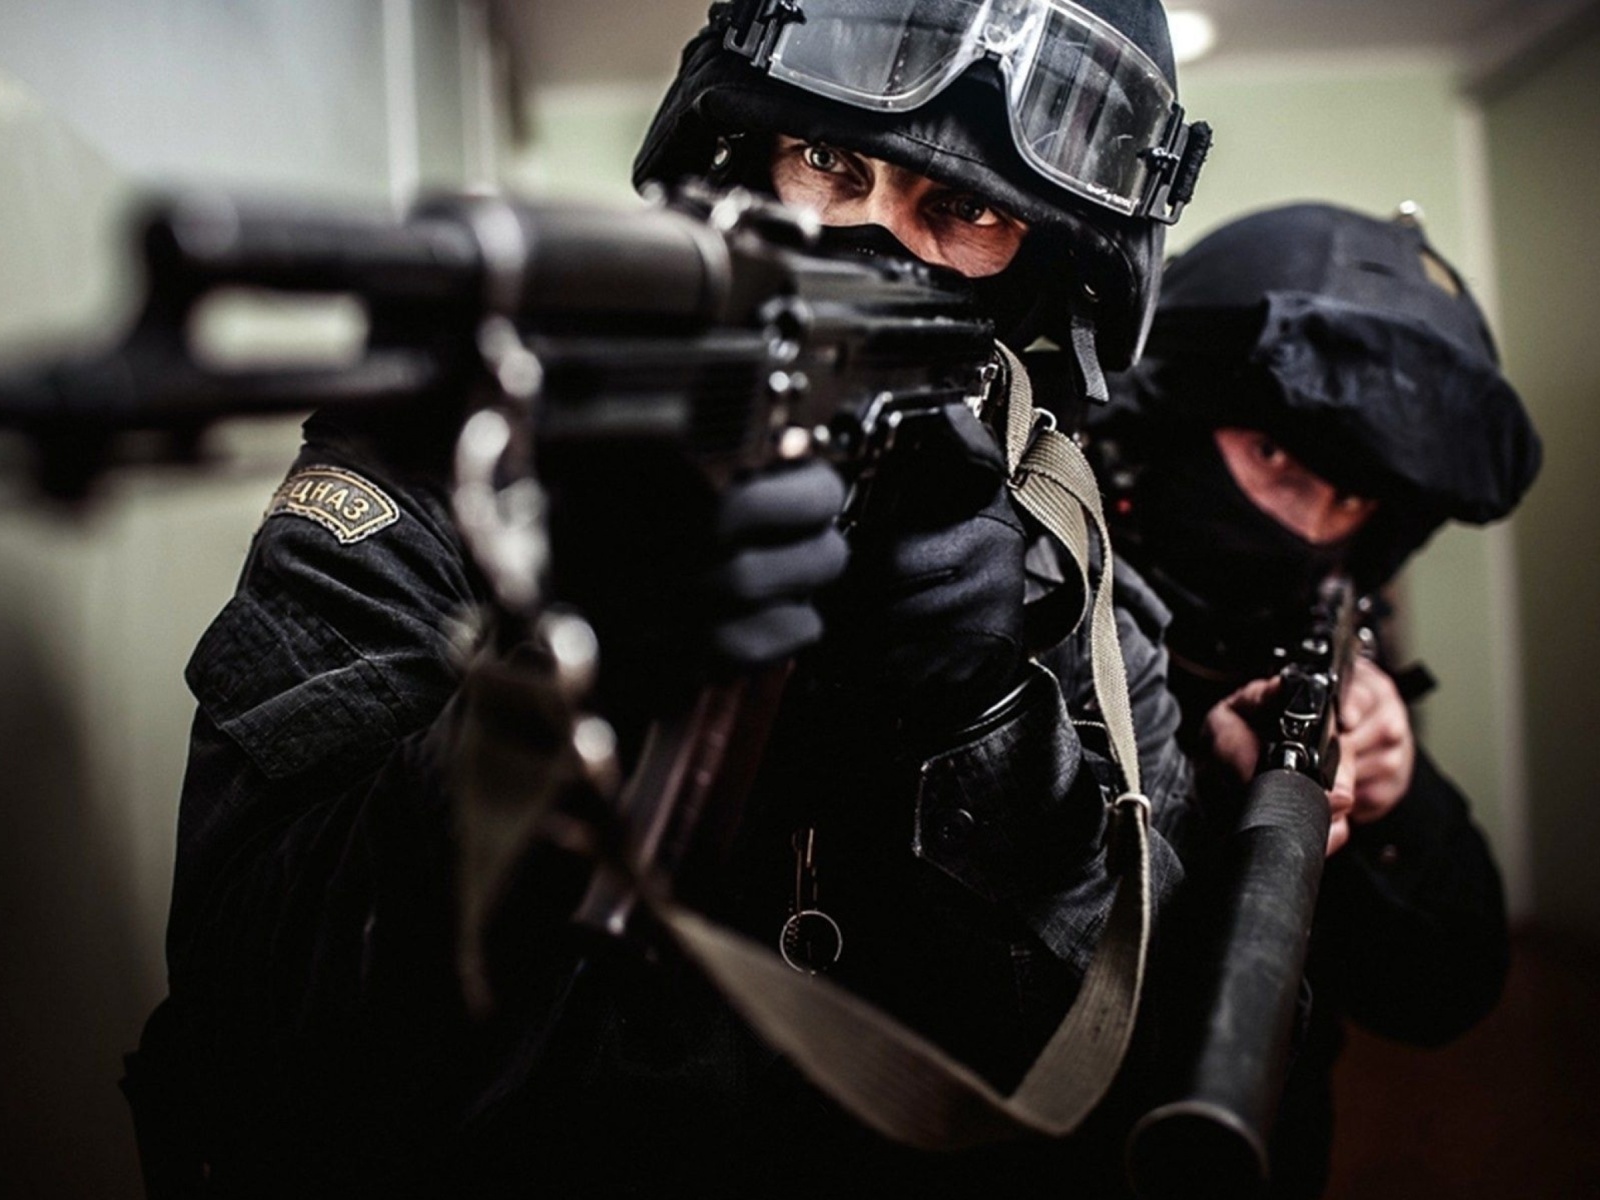 Police special forces wallpaper 1600x1200